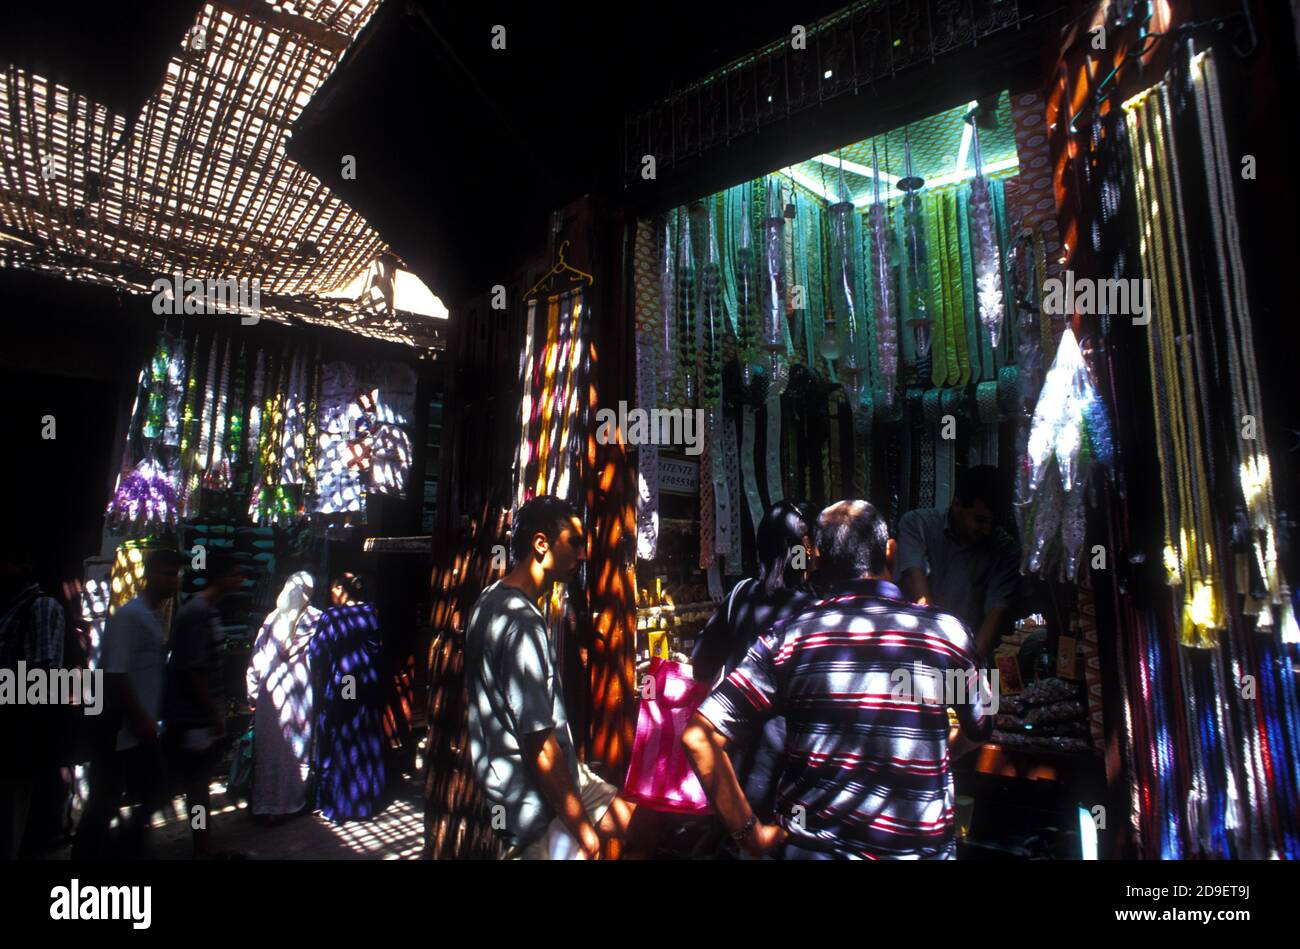 Covered market at the Marrakech's medina, in Morocco. Stock Photo